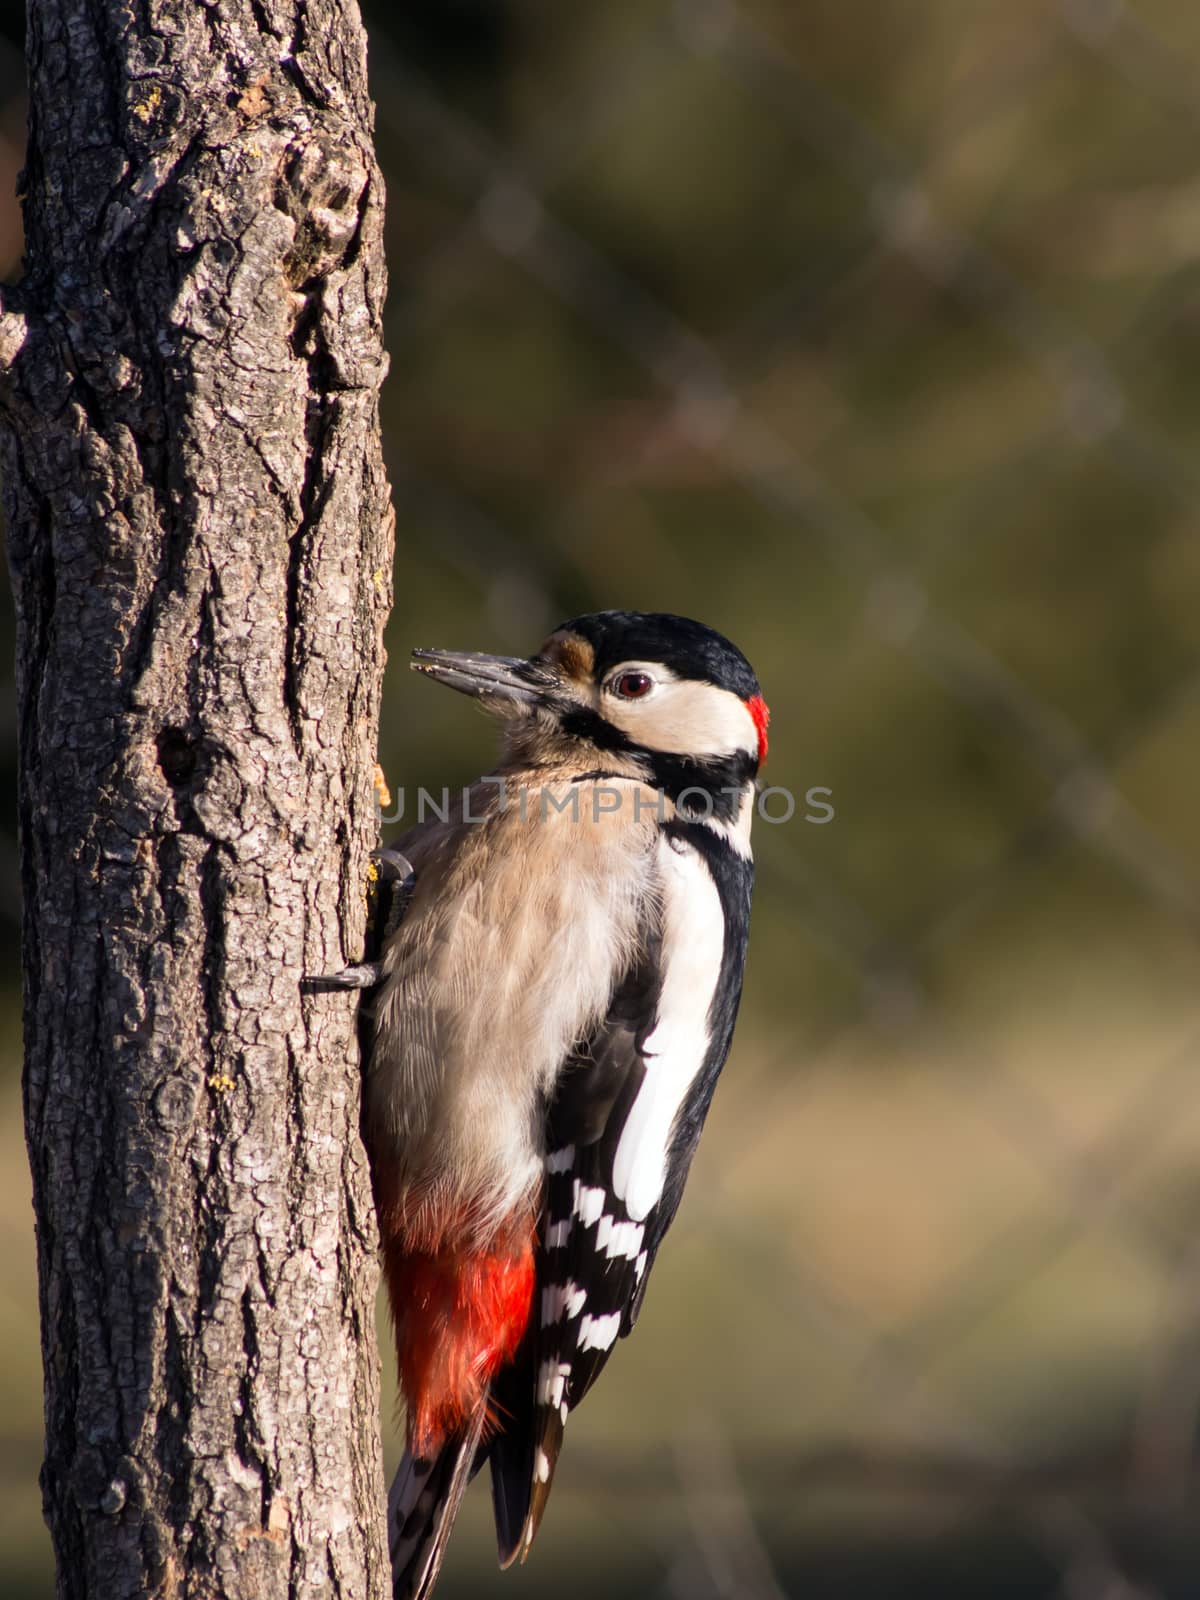 Great Spotted Woodpecker (Dendrocopos major) in the bird feeder.
